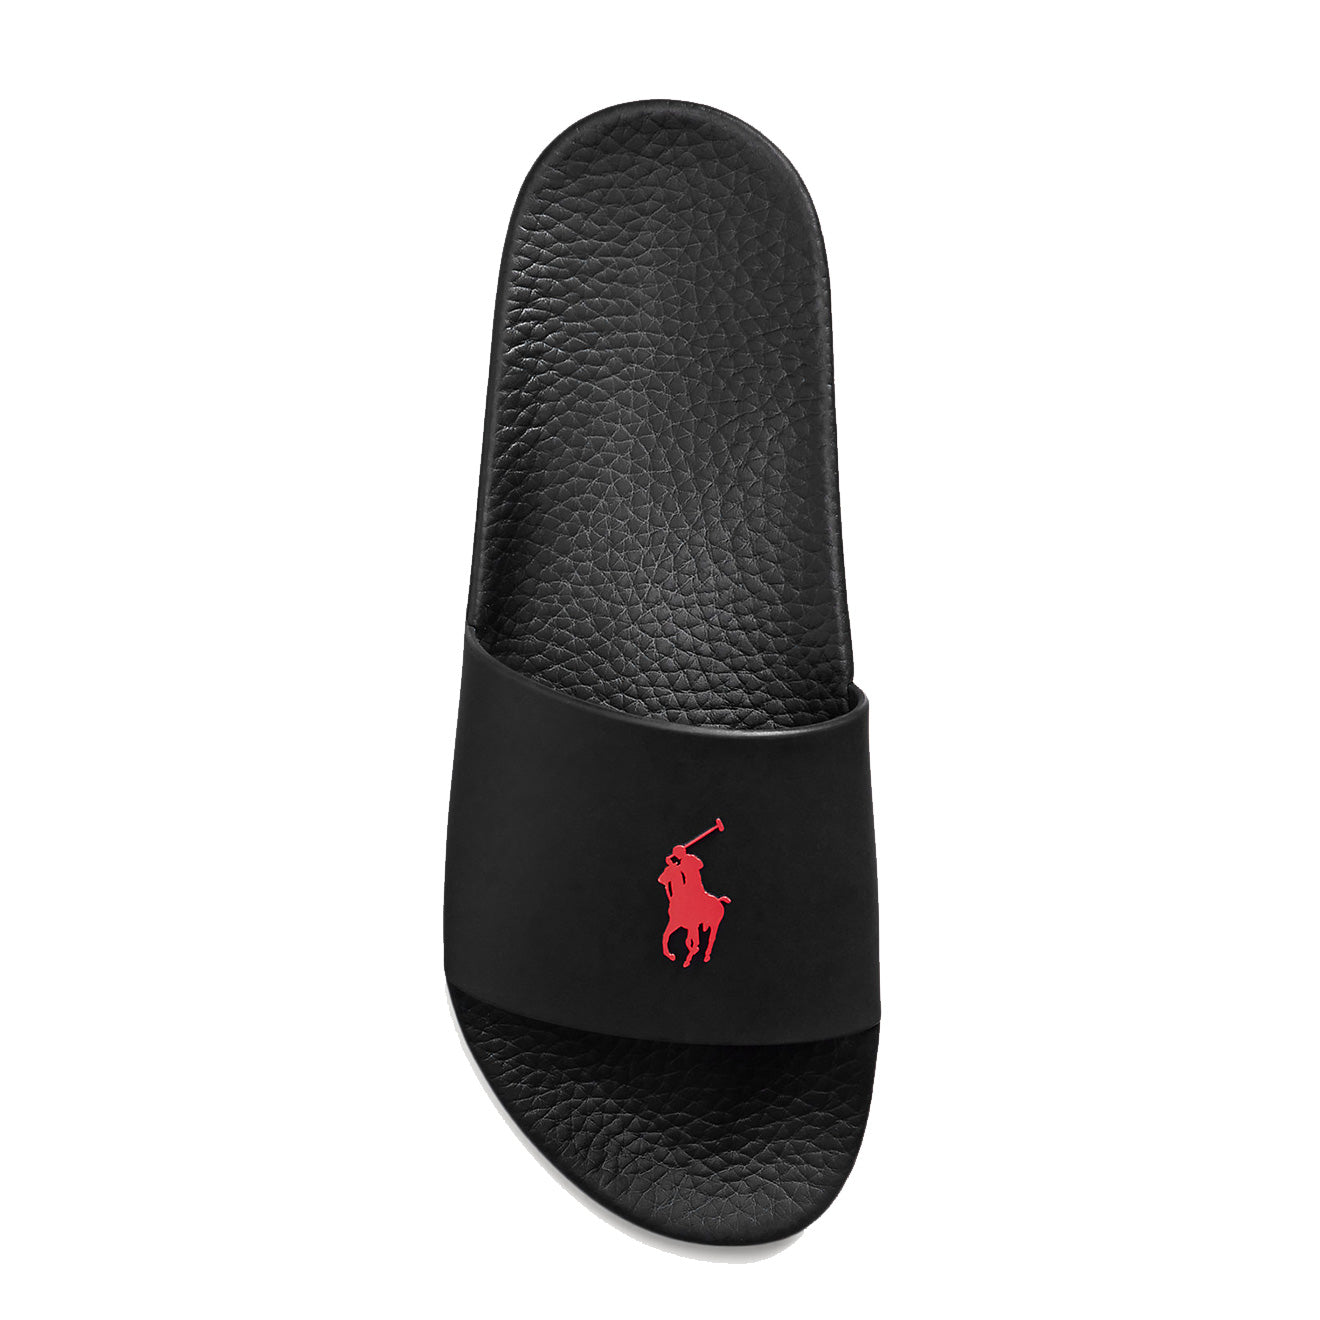 Polo Ralph Lauren Signature Pony Slide Black / Red Pp | The Sporting Lodge